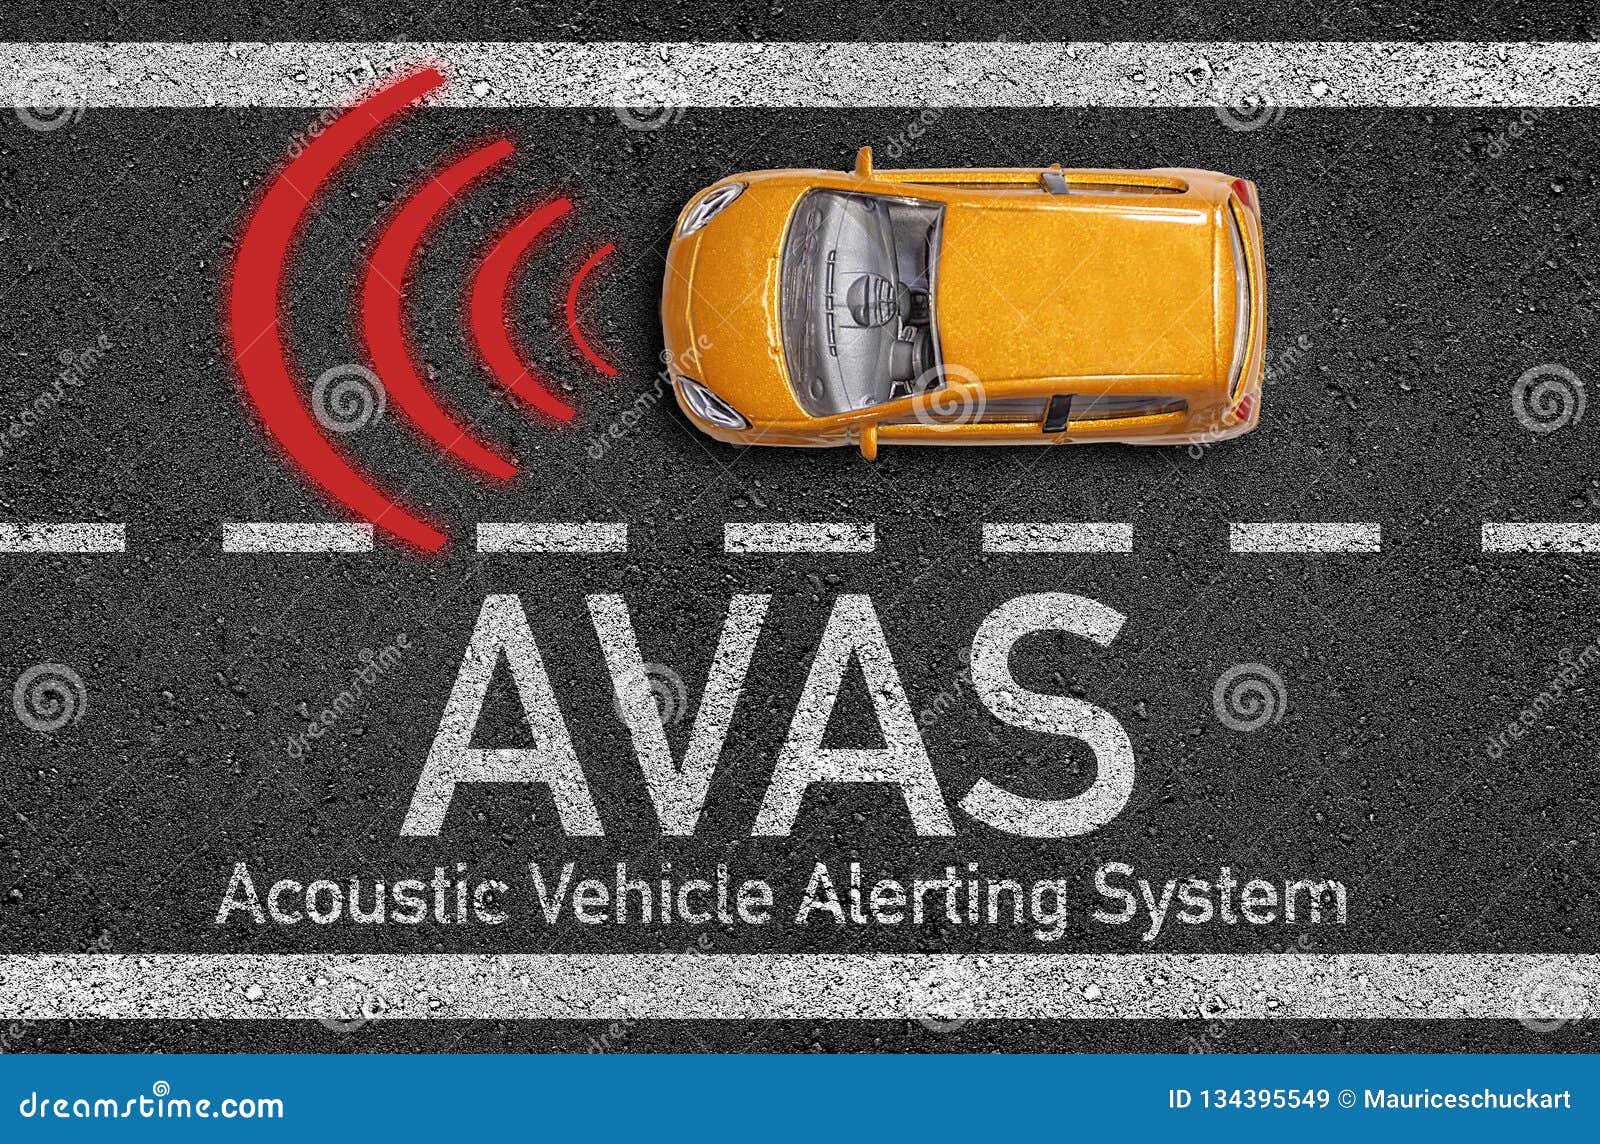 asphalt with miniature car and avas acoustic vehicle alerting system